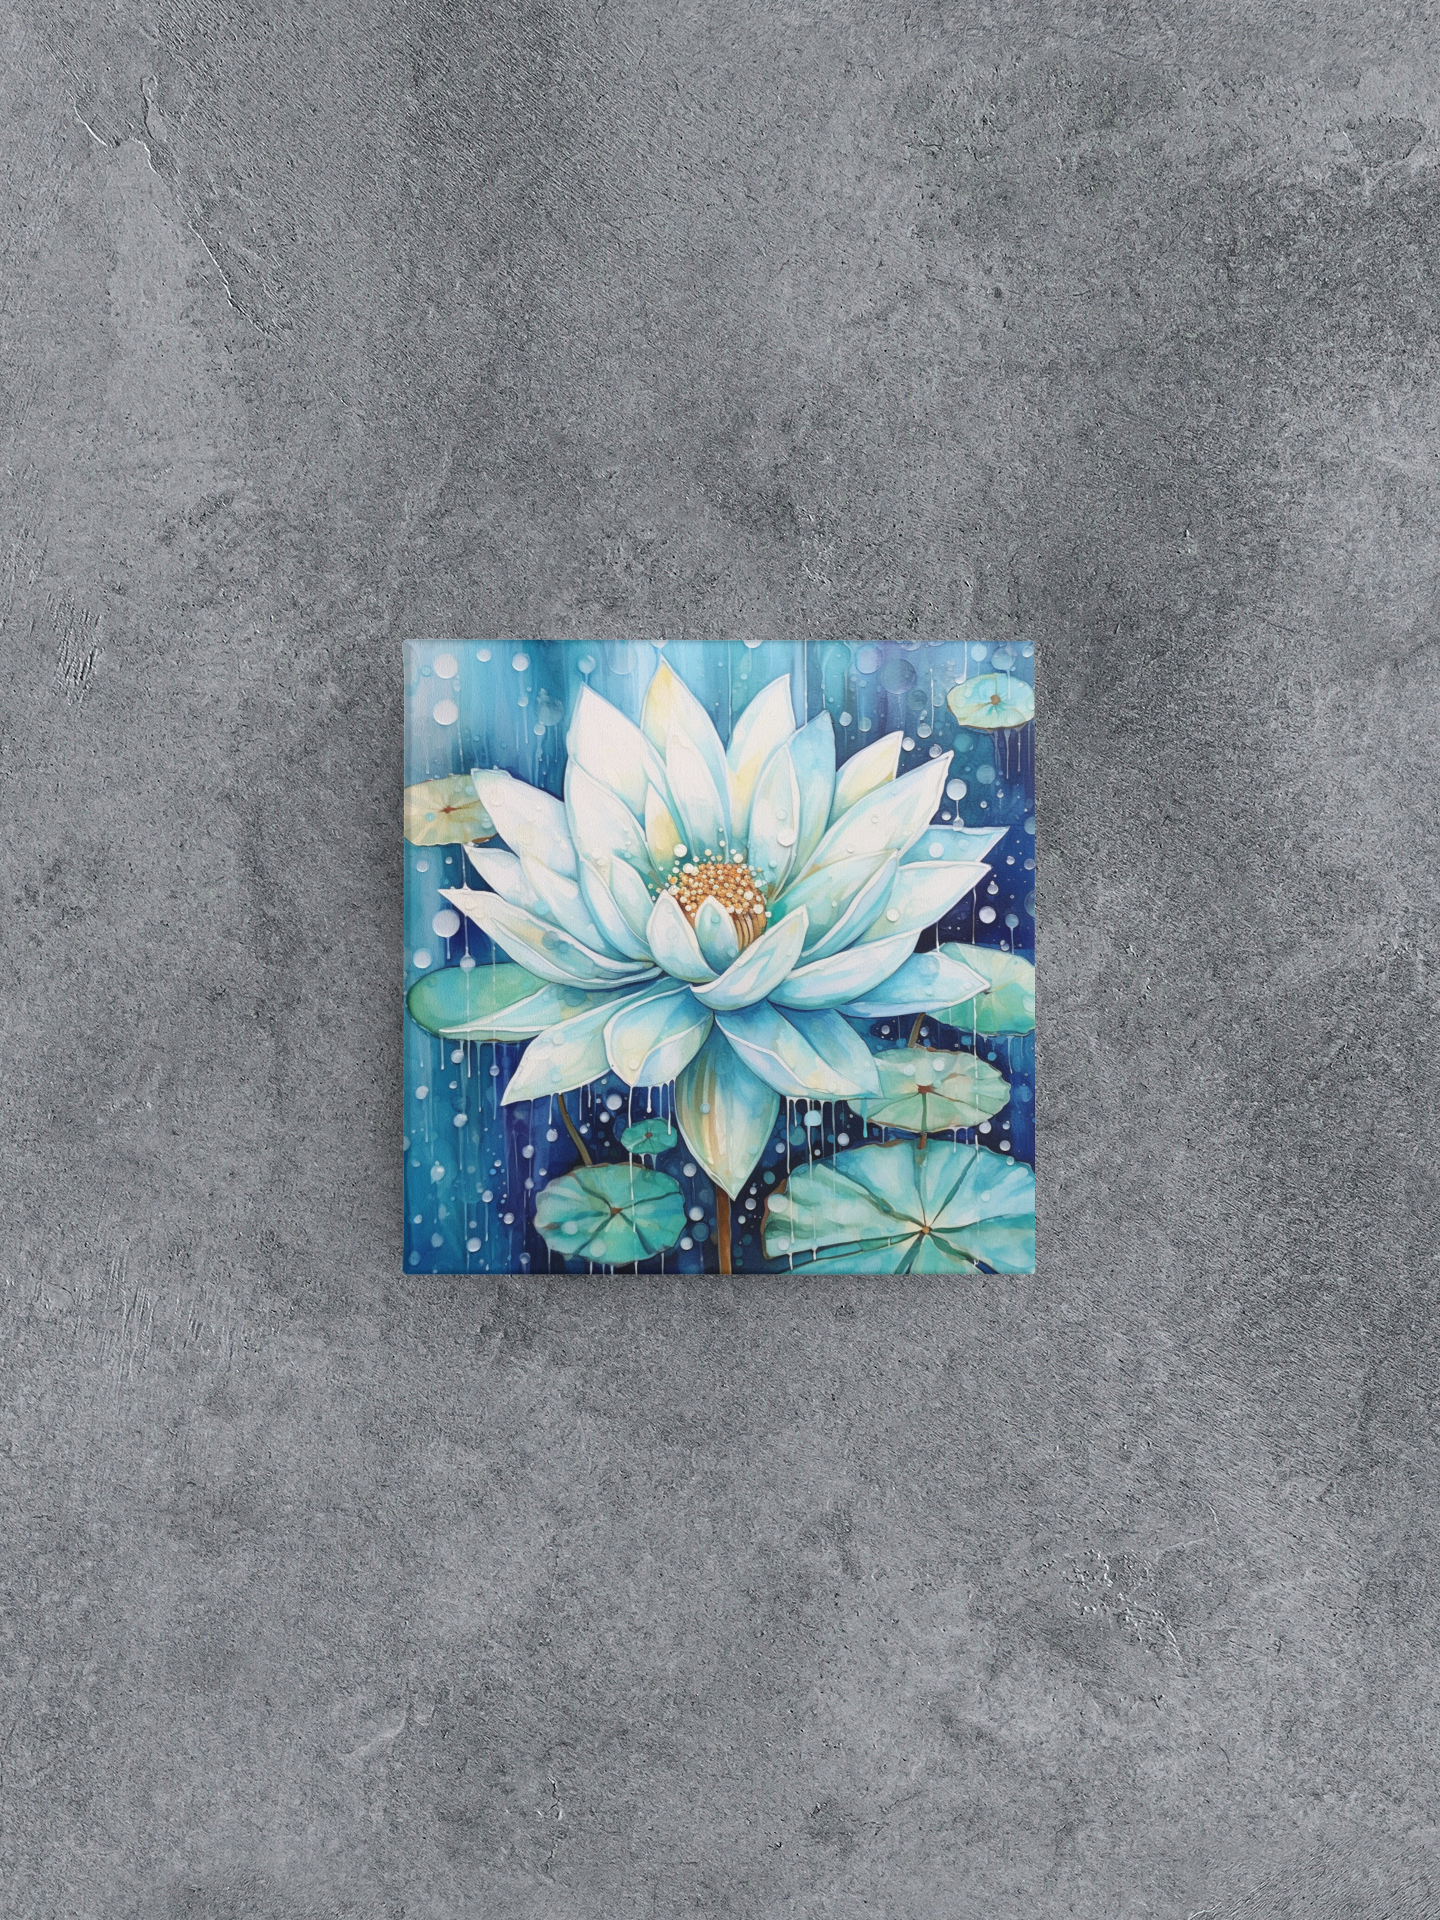 Water Lily Canvas Wall Art, Water Lily Painting, Lotus Flower Canvas Print, Lily Pads Painting, Pond Plants Wall Art, Nature Canvas Art